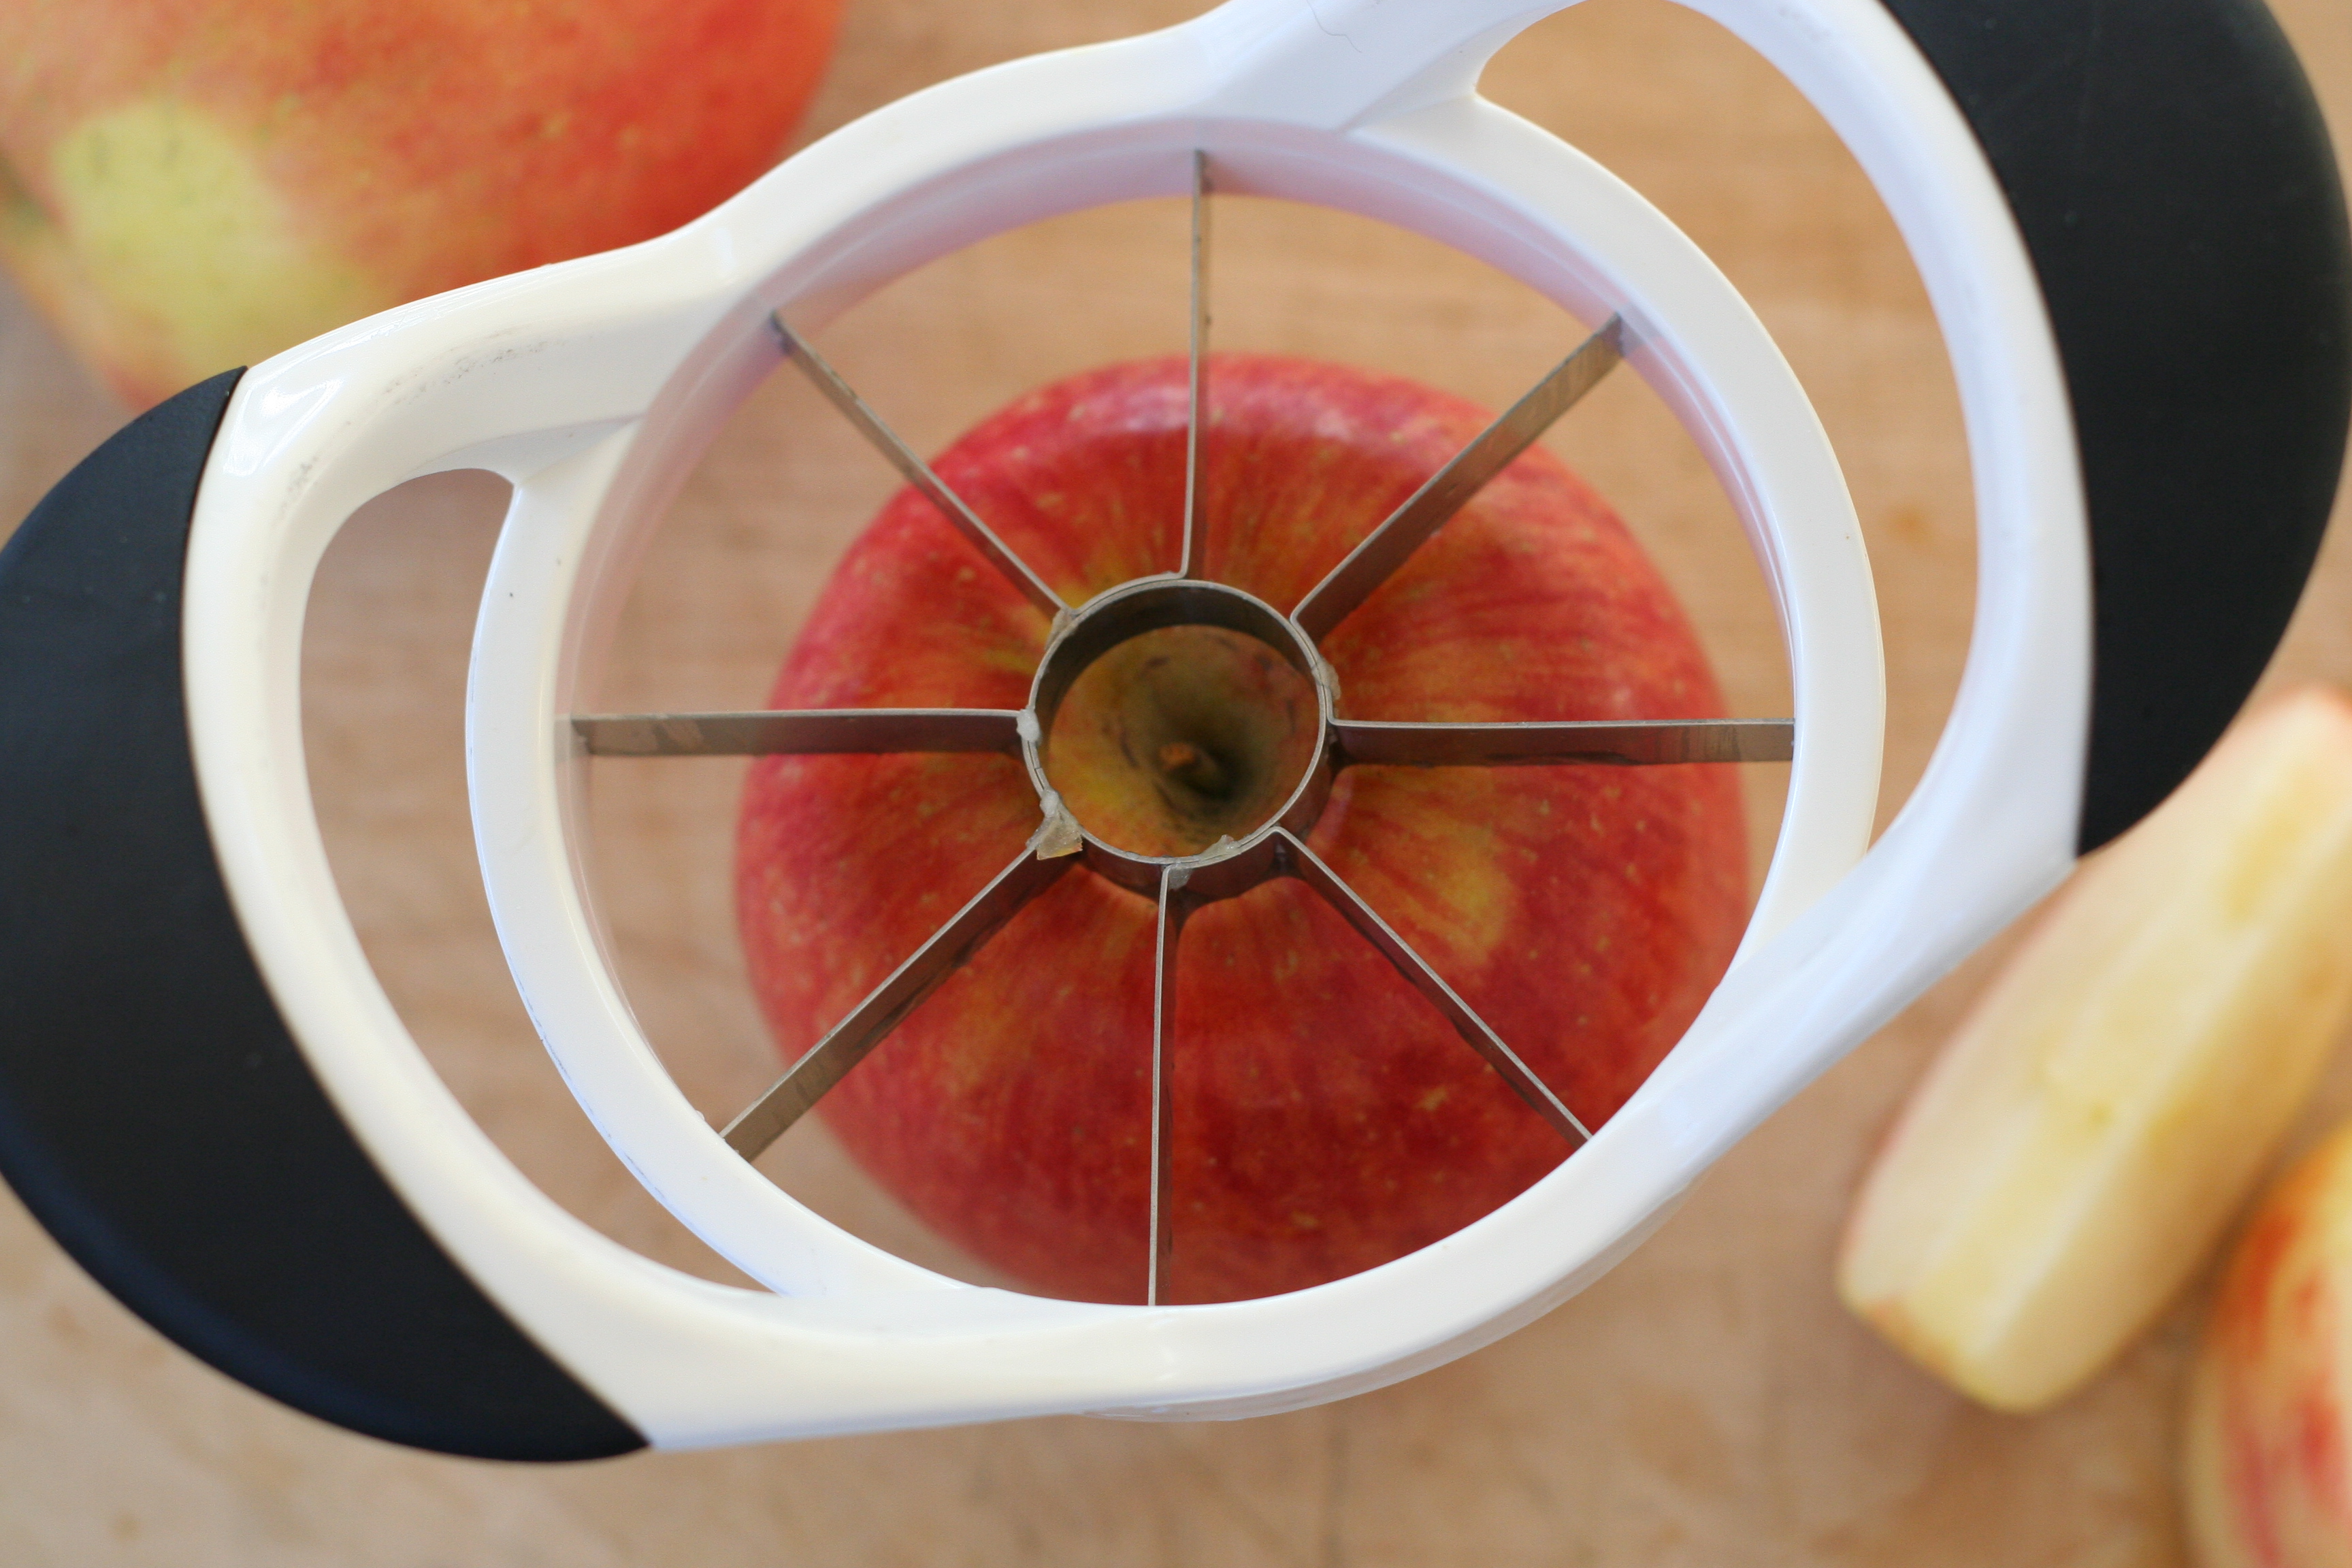 Cutting Apple with Slicer/Corer